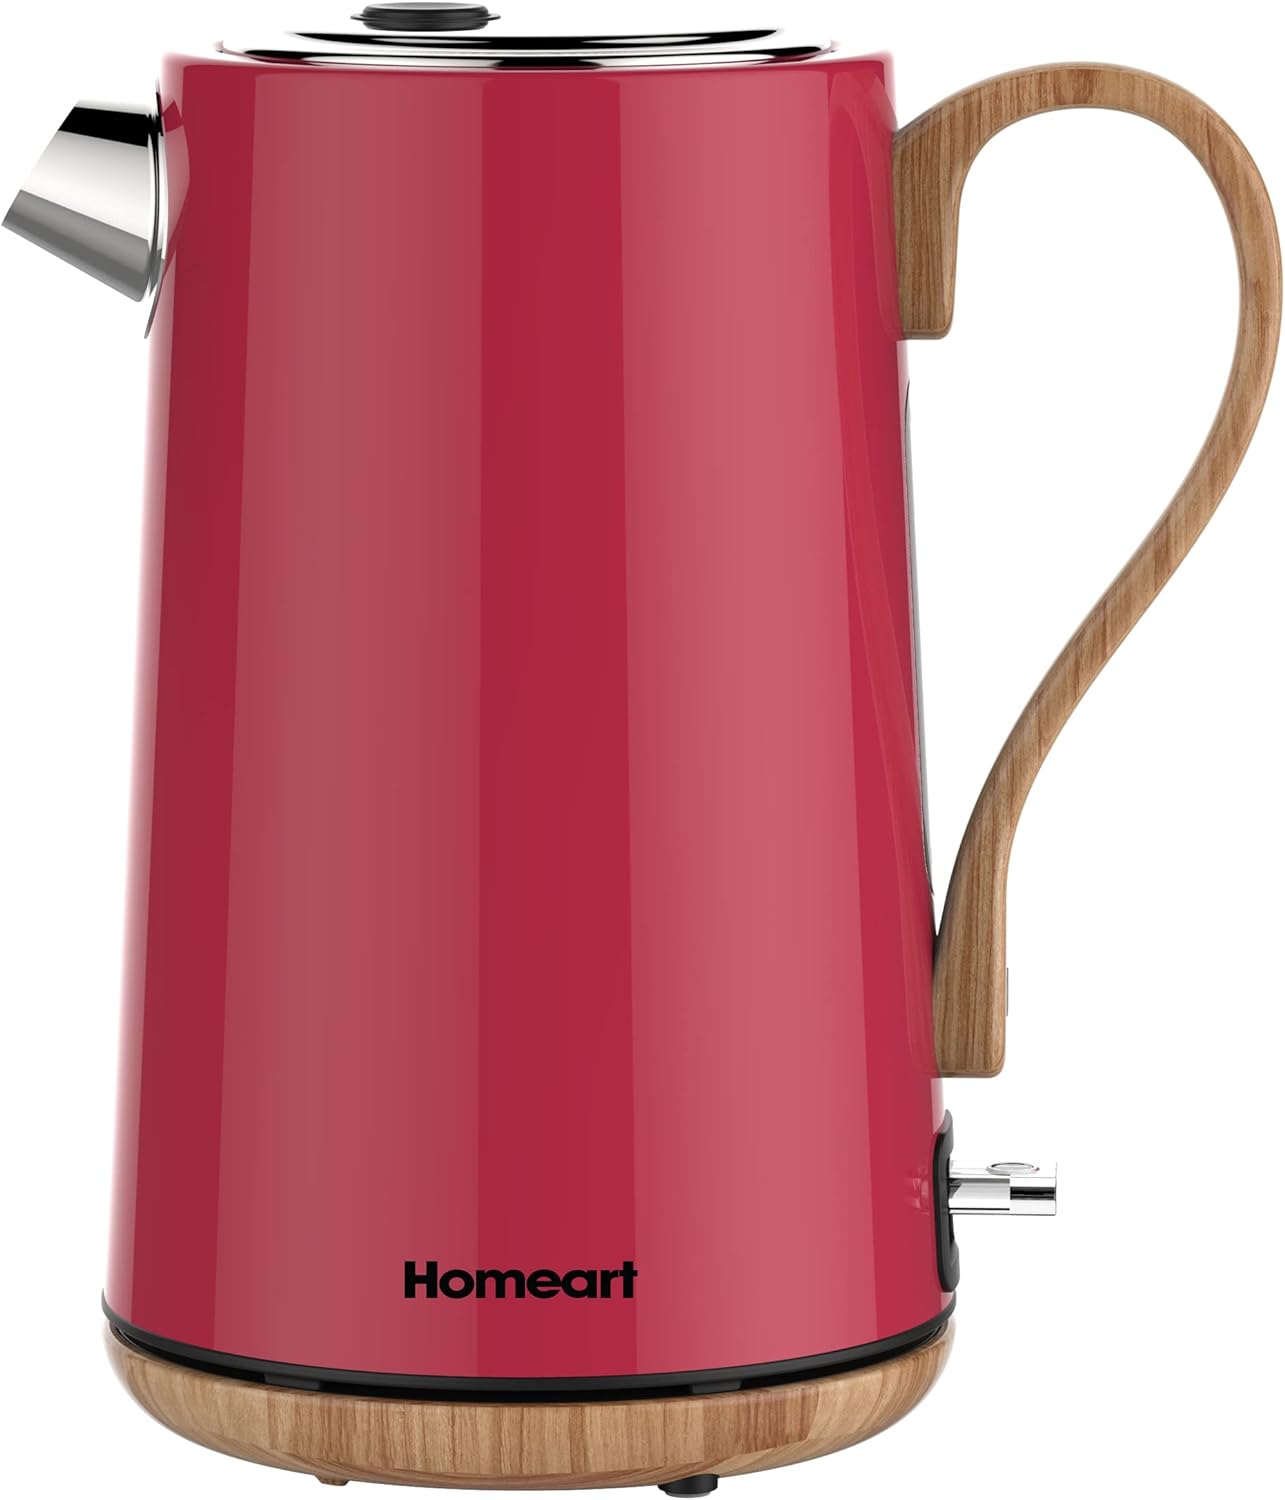 Homeart Panda Cordless Electric Kettle with Wood Detail - Stainless Steel With Removable Filter, Fast Boiling and Auto Shut-off - 1.7L Capacity